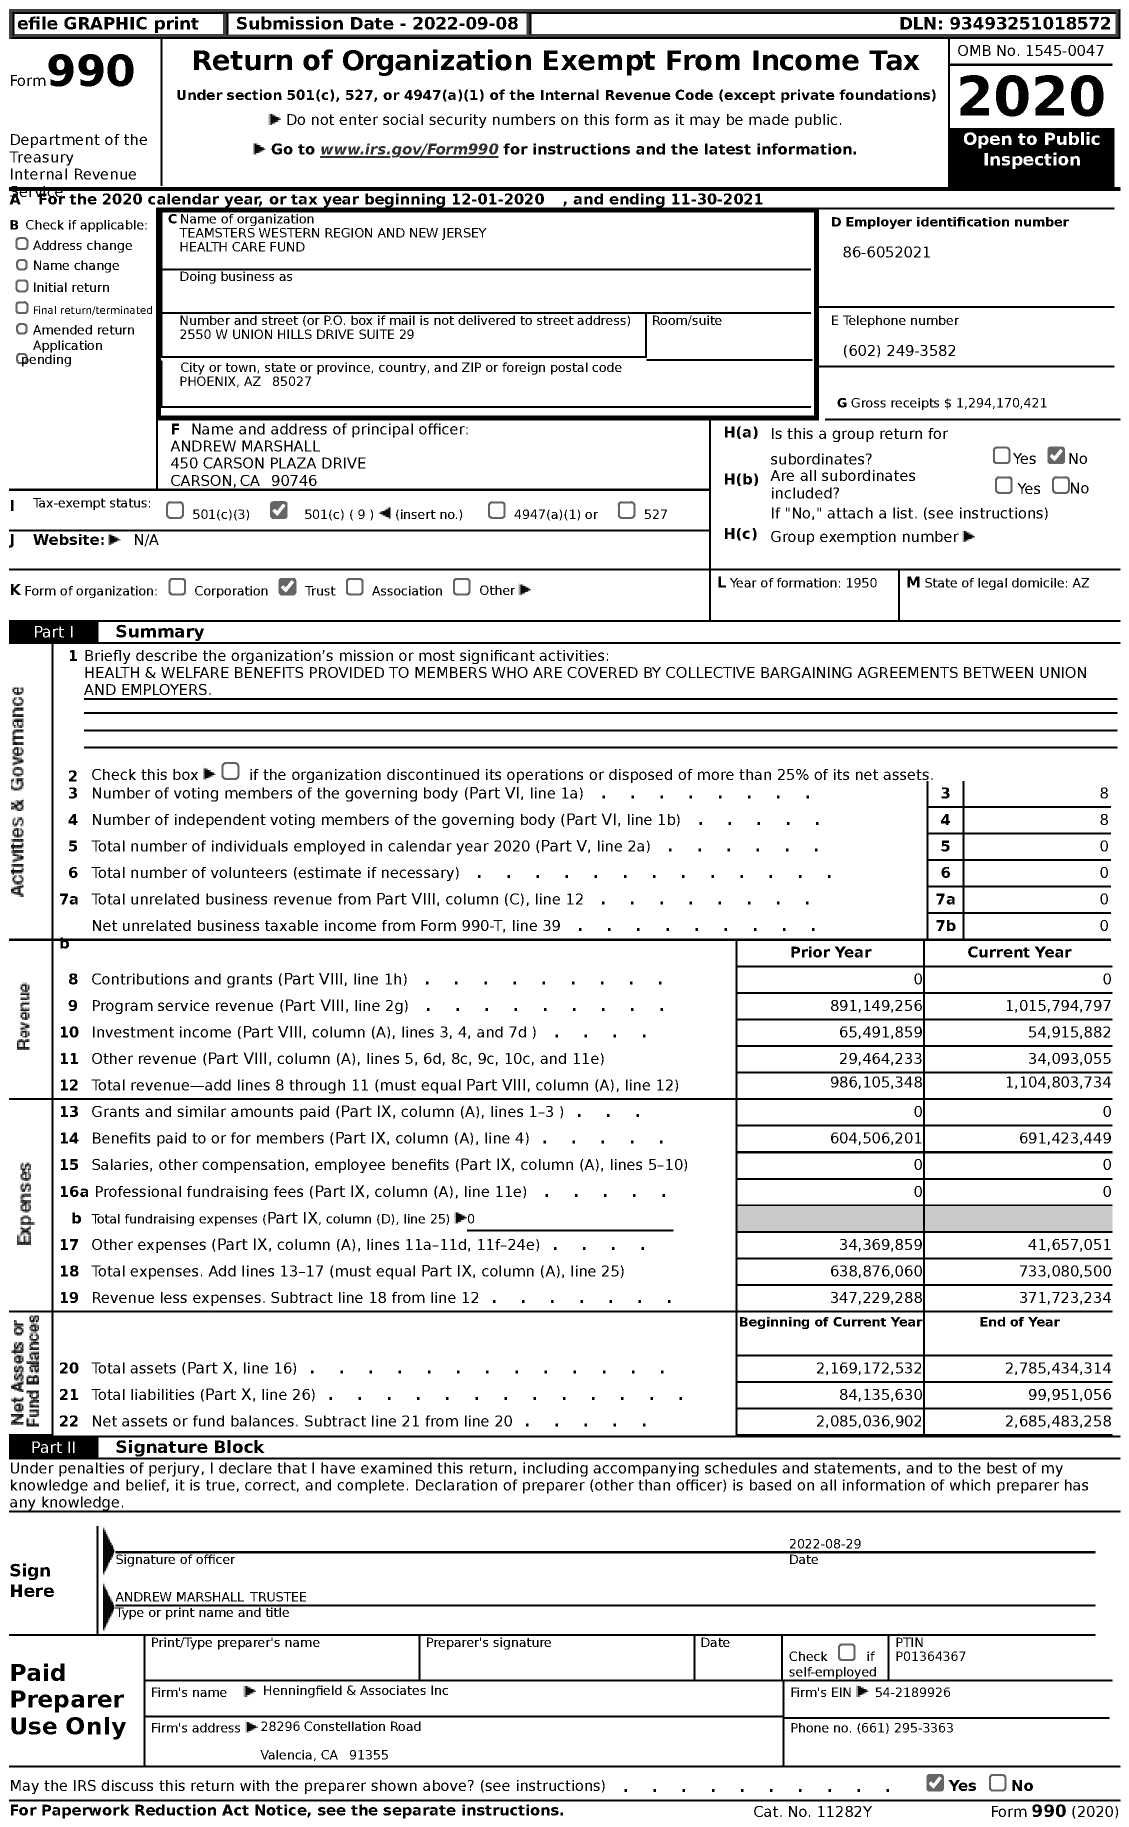 Image of first page of 2020 Form 990 for Teamsters Western Region and New Jersey Health Care Fund